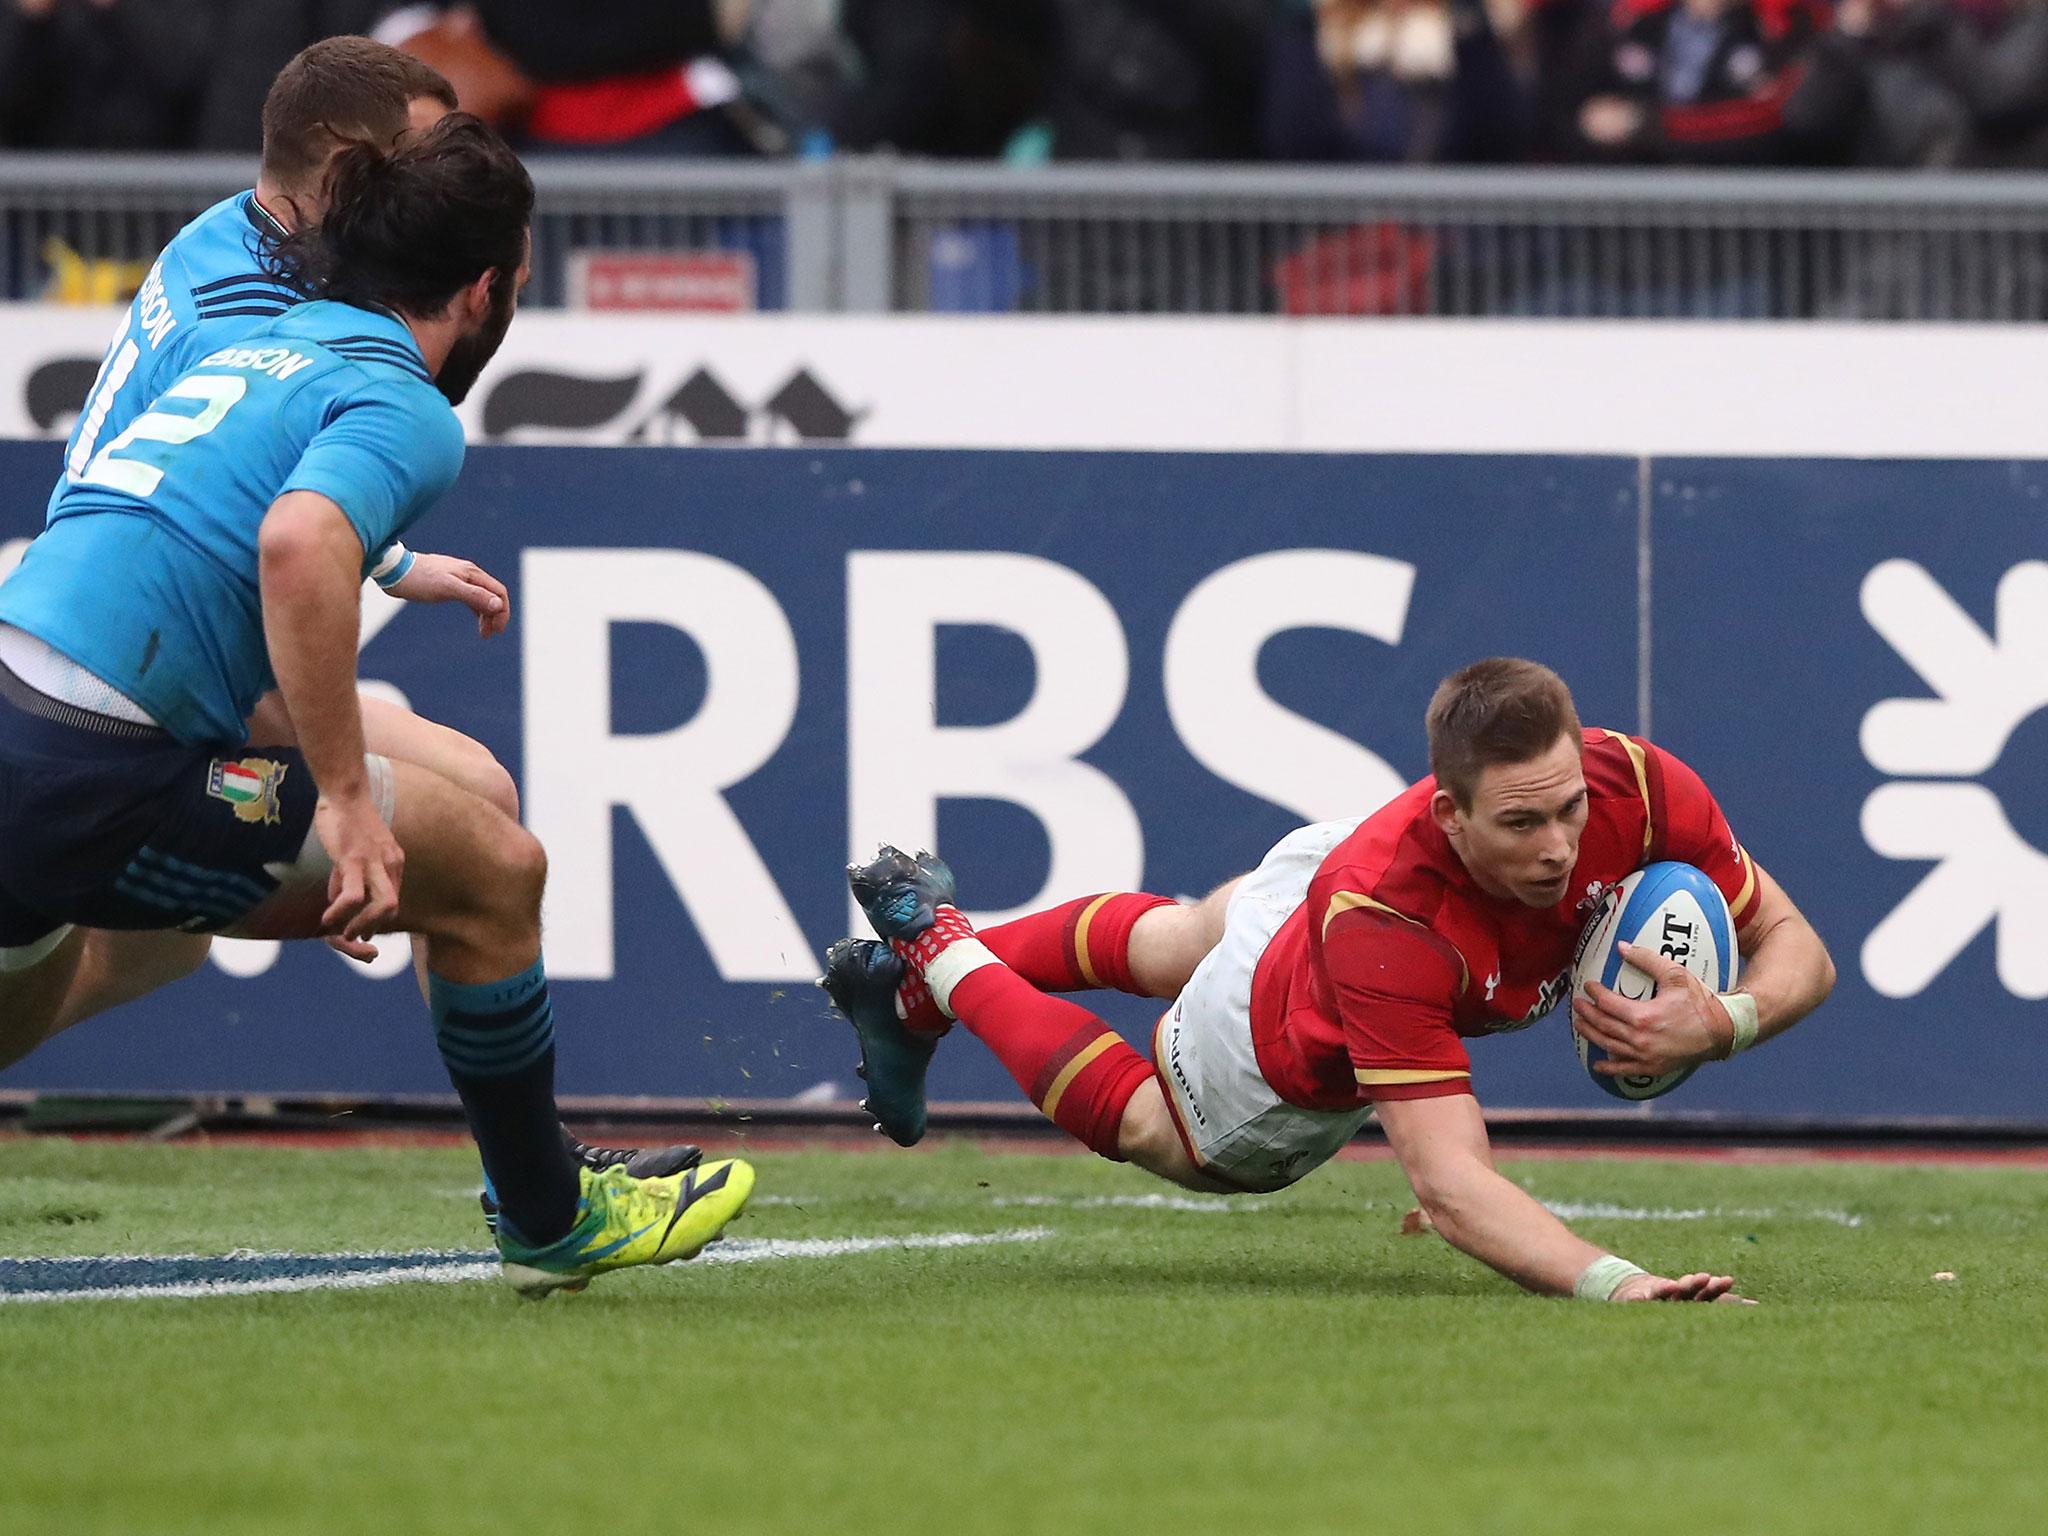 Liam Williams scores the second try for Wales against Italy